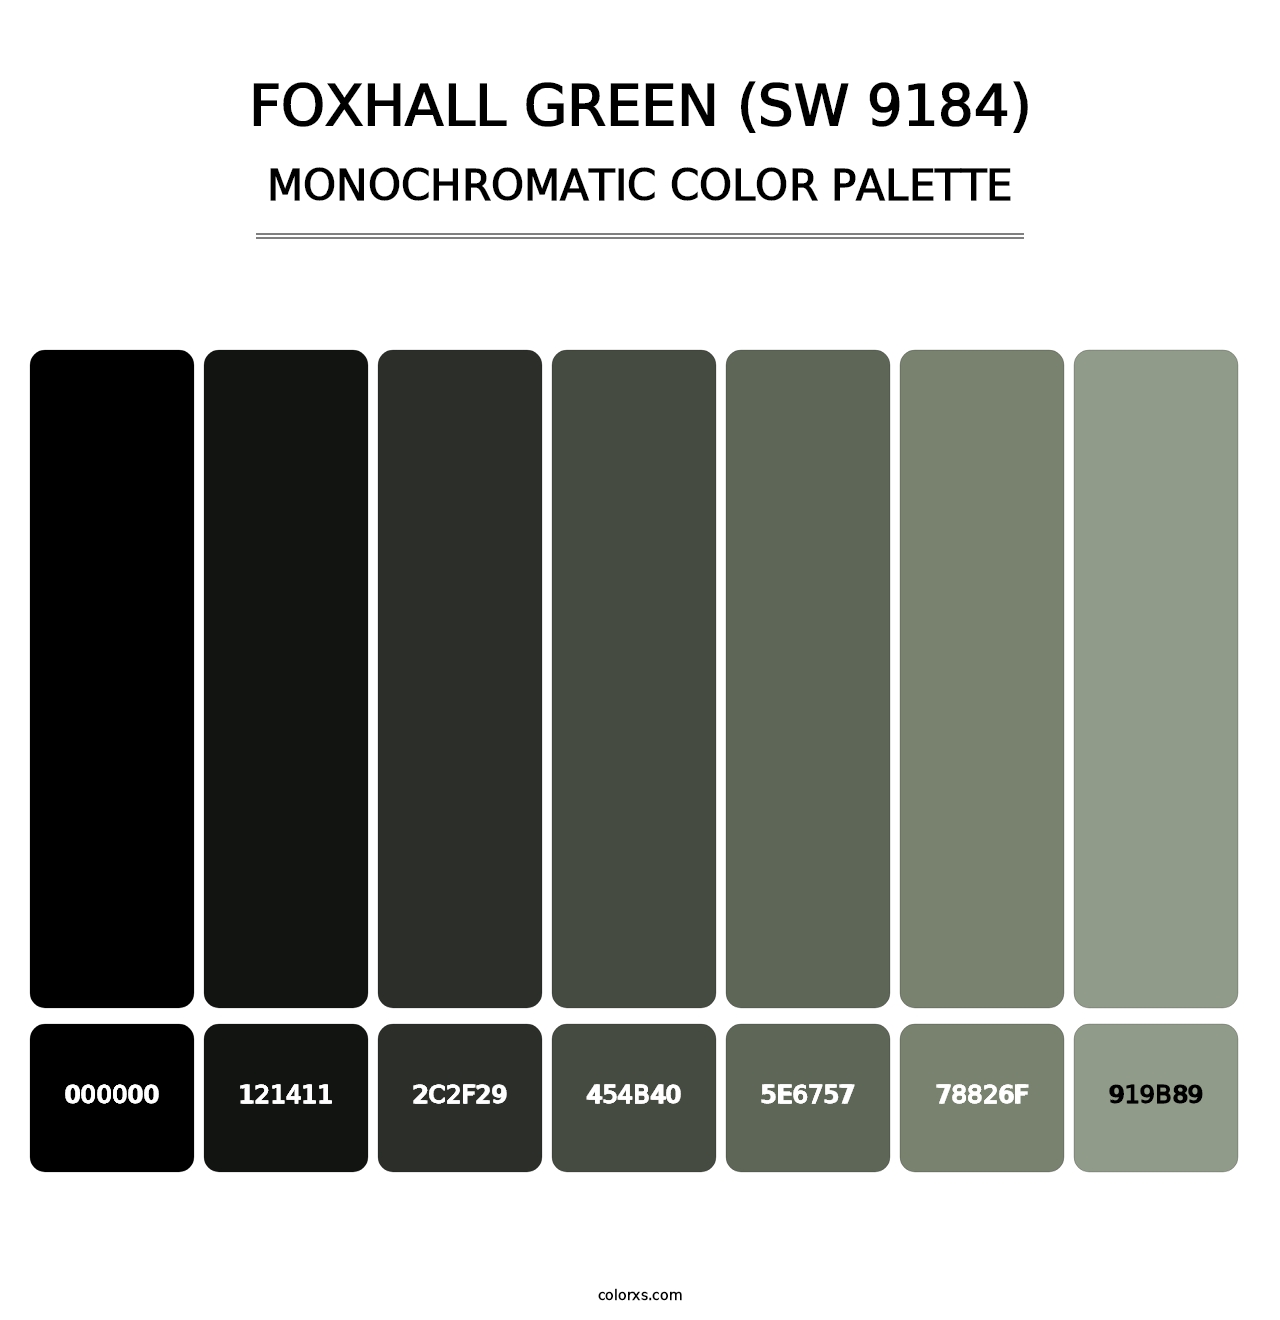 Foxhall Green (SW 9184) - Monochromatic Color Palette